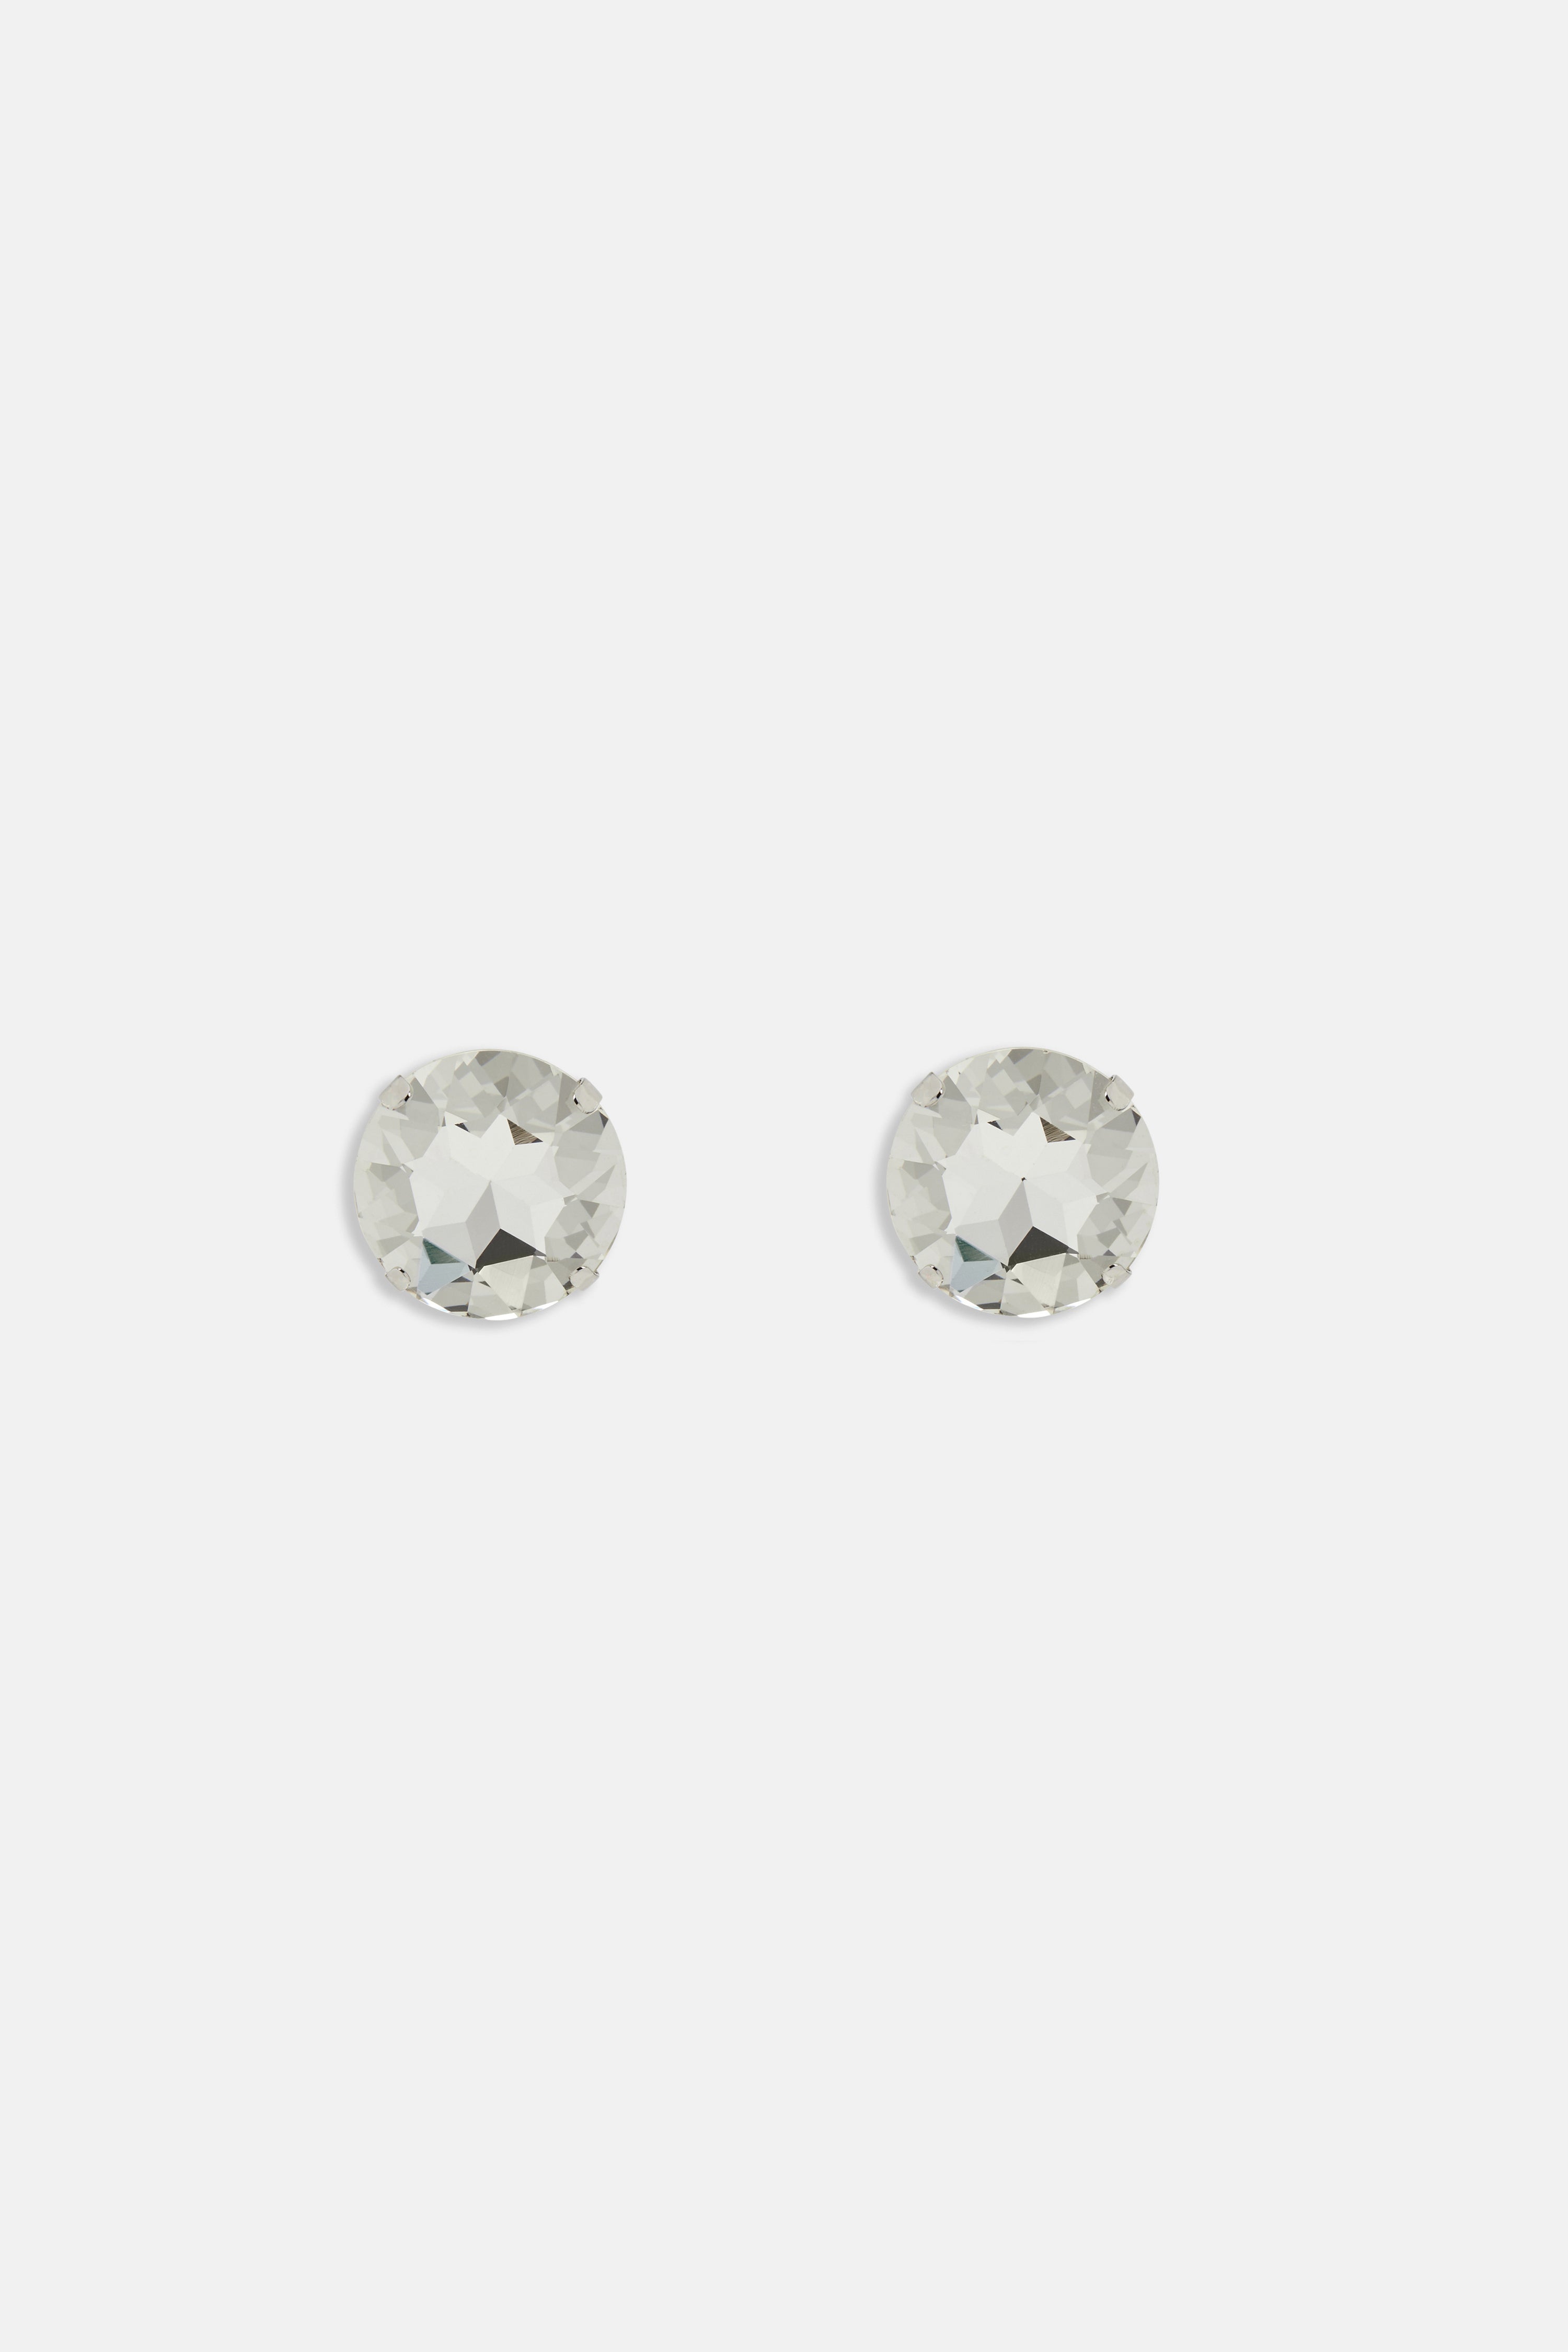 ROUND CRYSTAL EARRINGS - SMALL